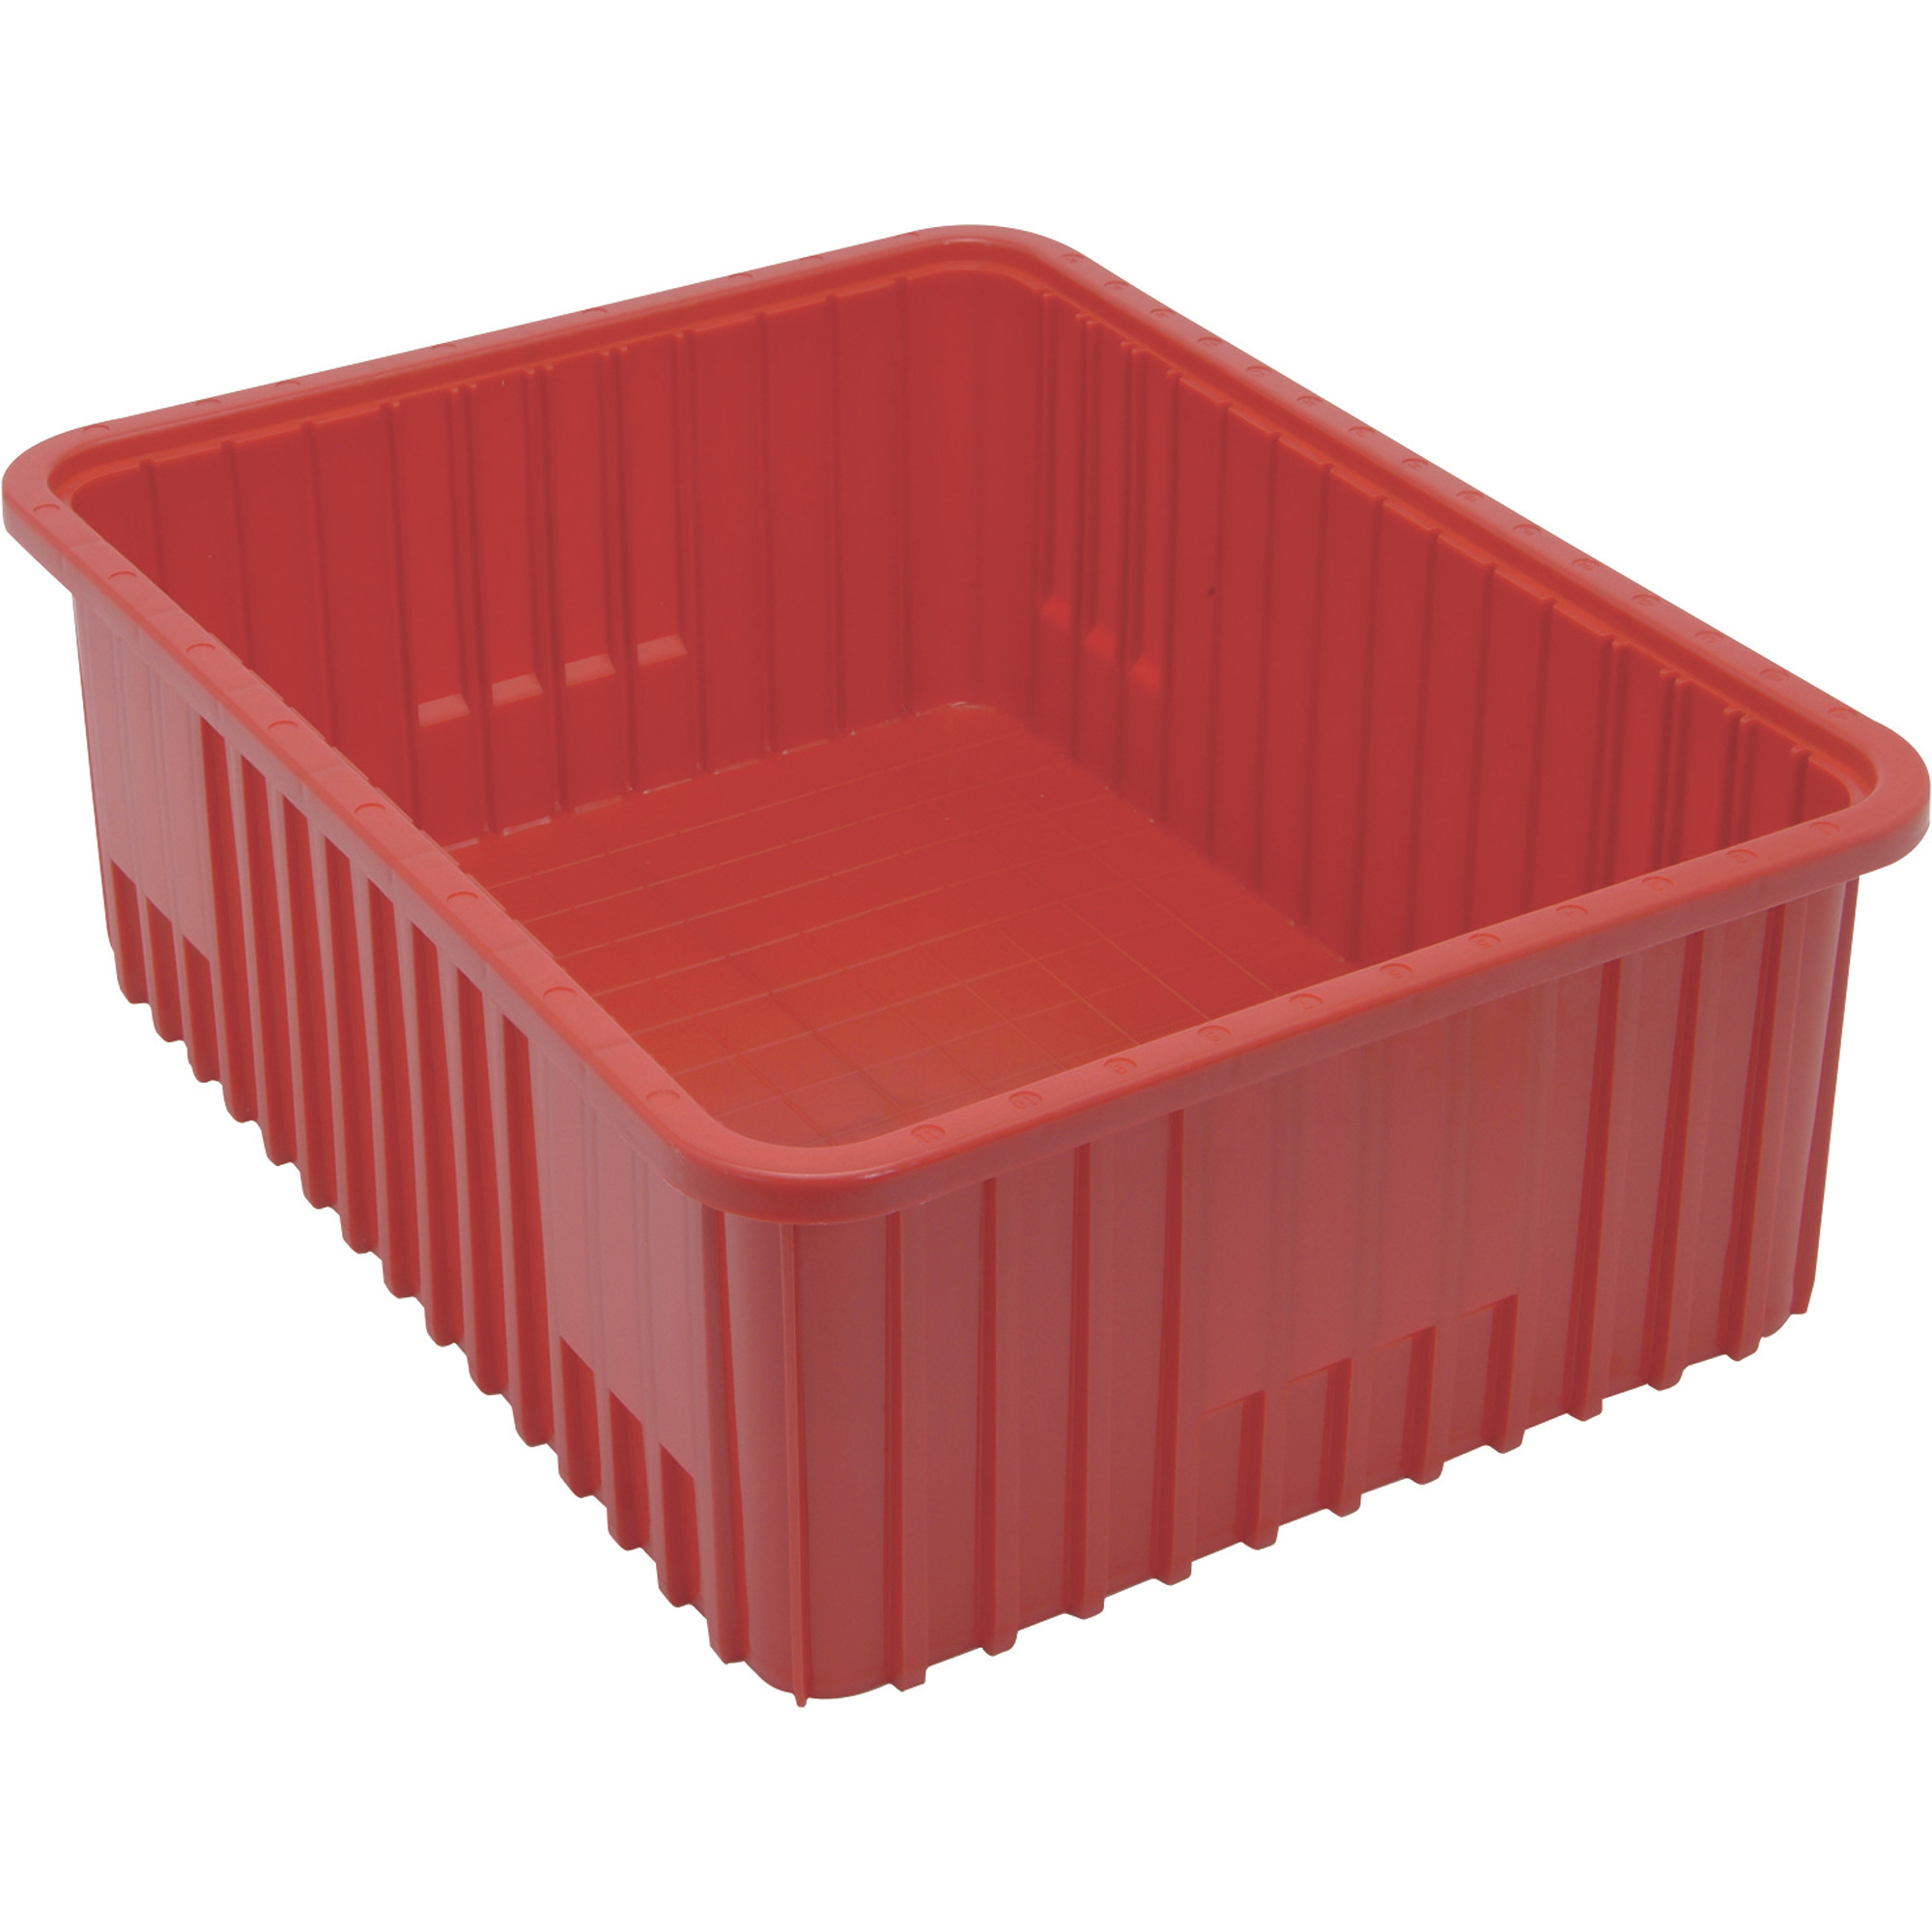 Quantum Storage Dividable Grid Container, 3-Pack, 22 1/2Inch L x 17 1/2Inch W x 8Inch H, Red, Model DG93080RD